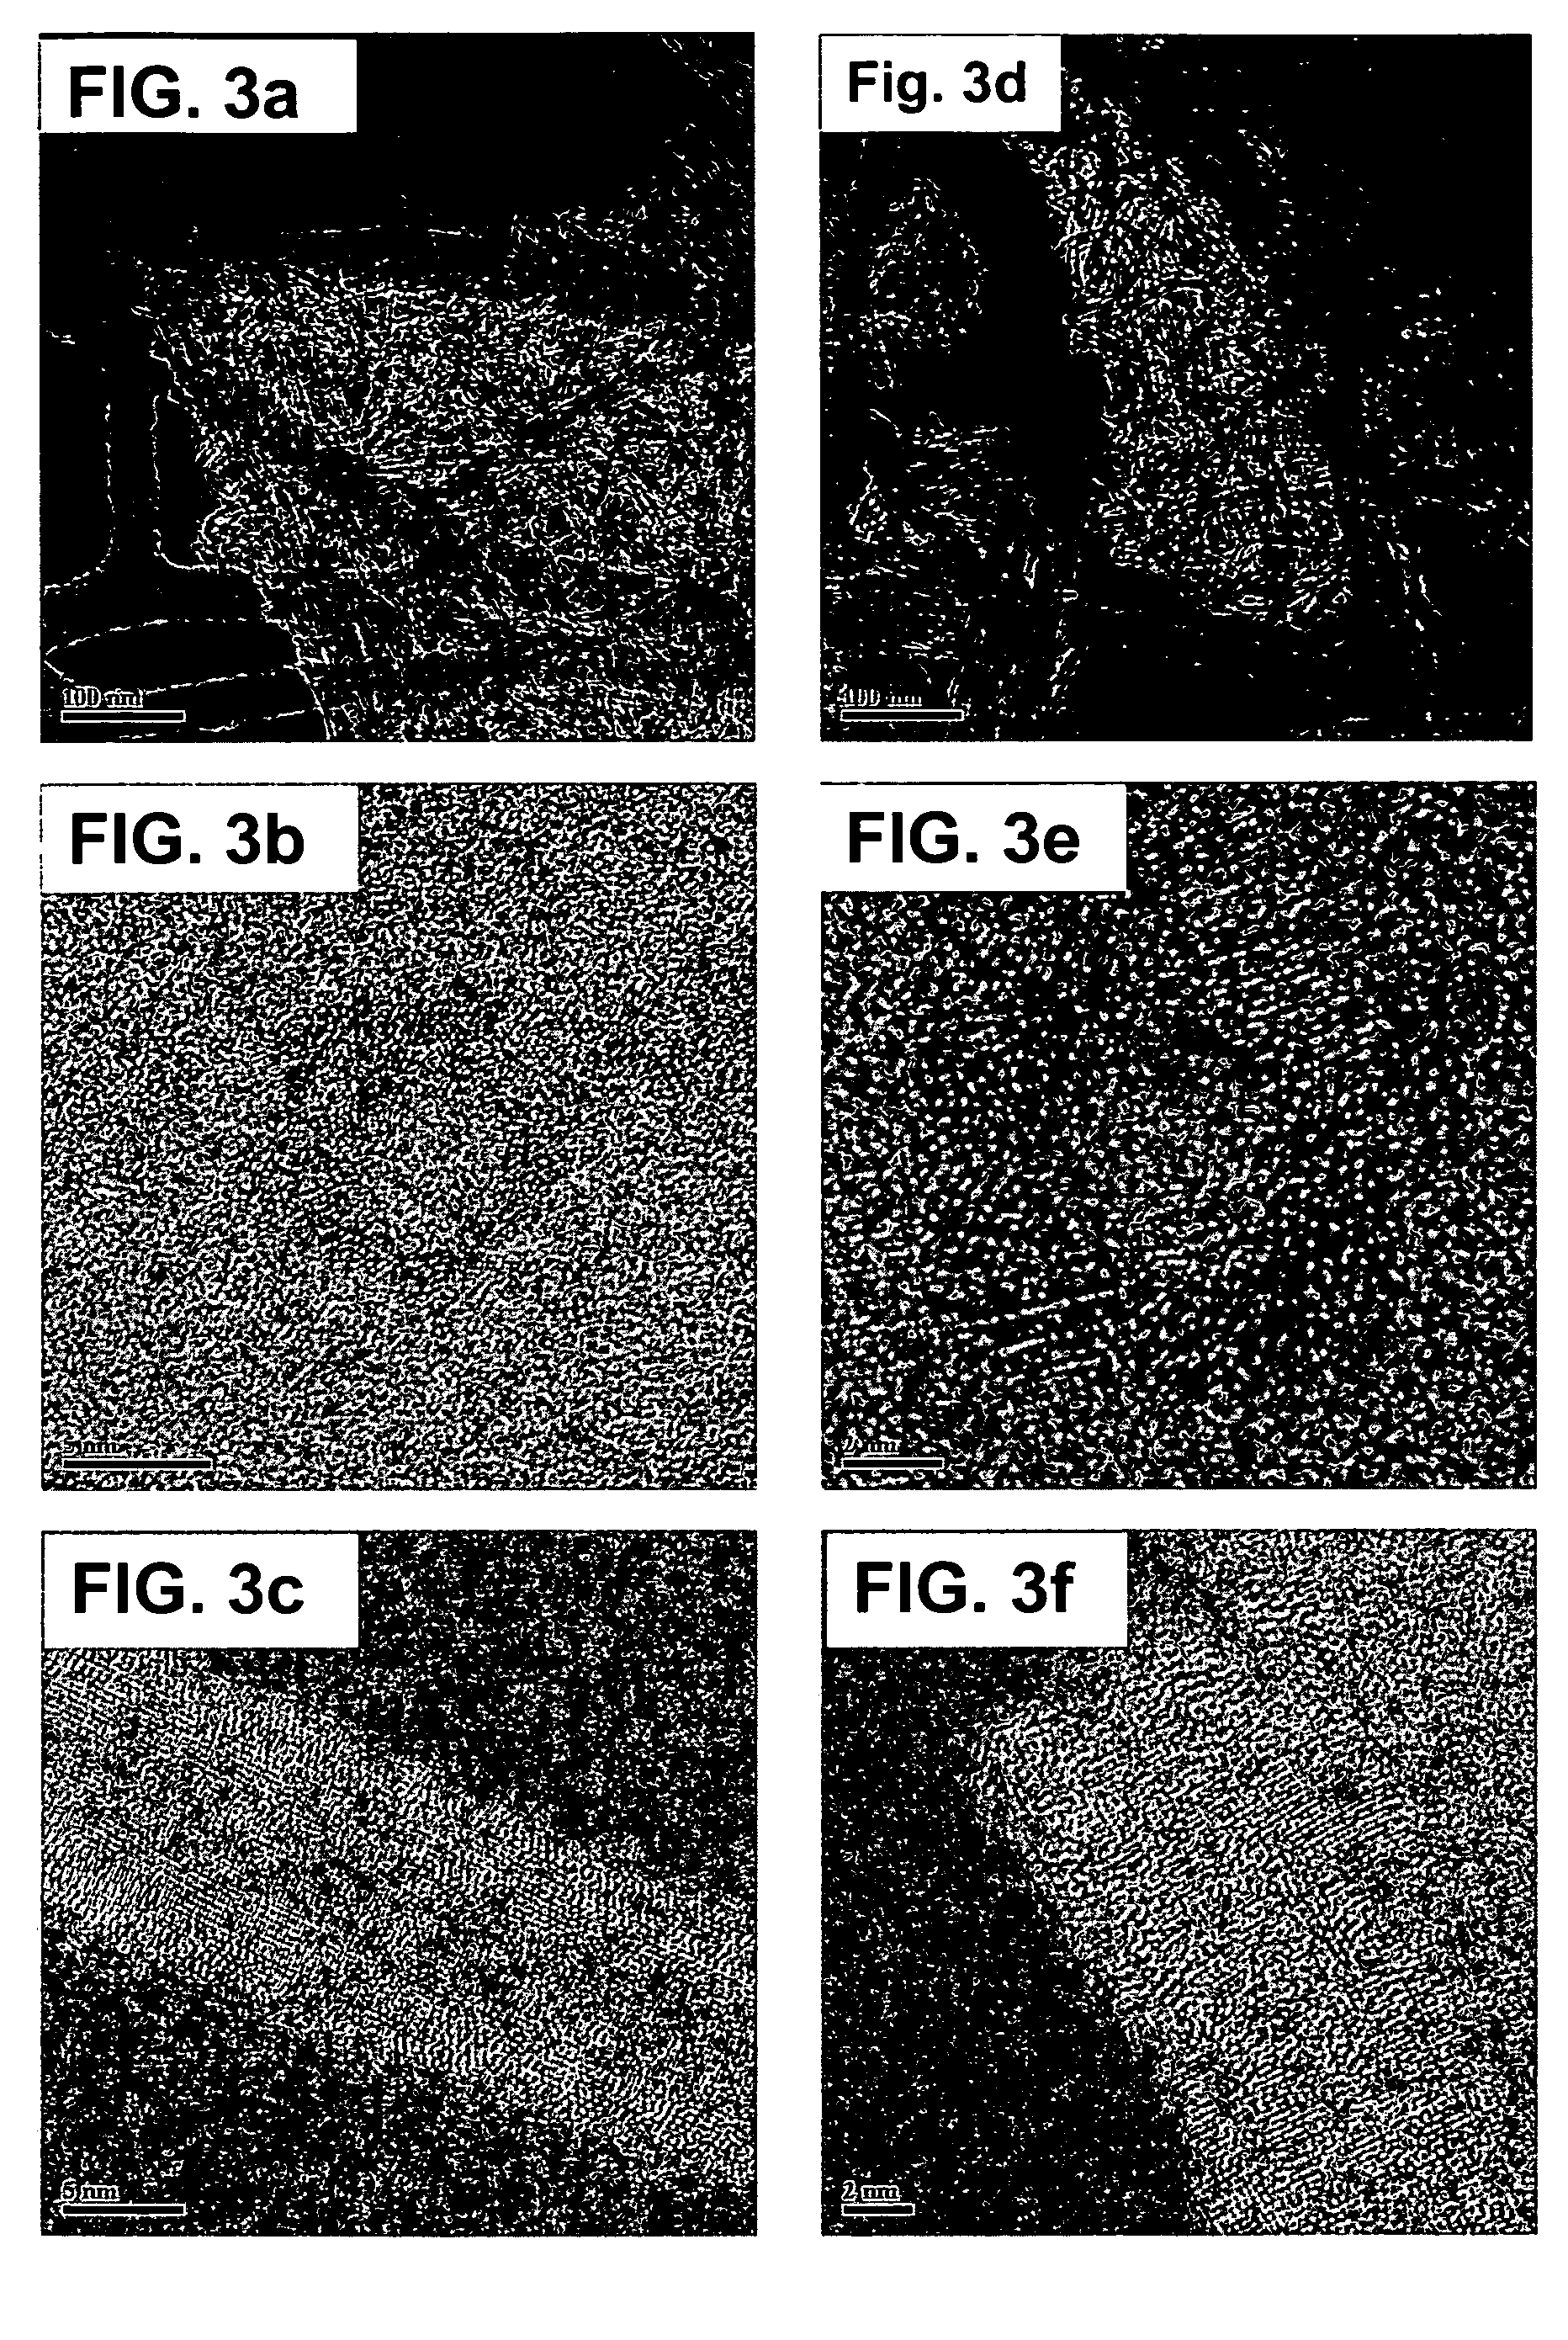 Nanostructured titanium oxide material and its synthesis procedure